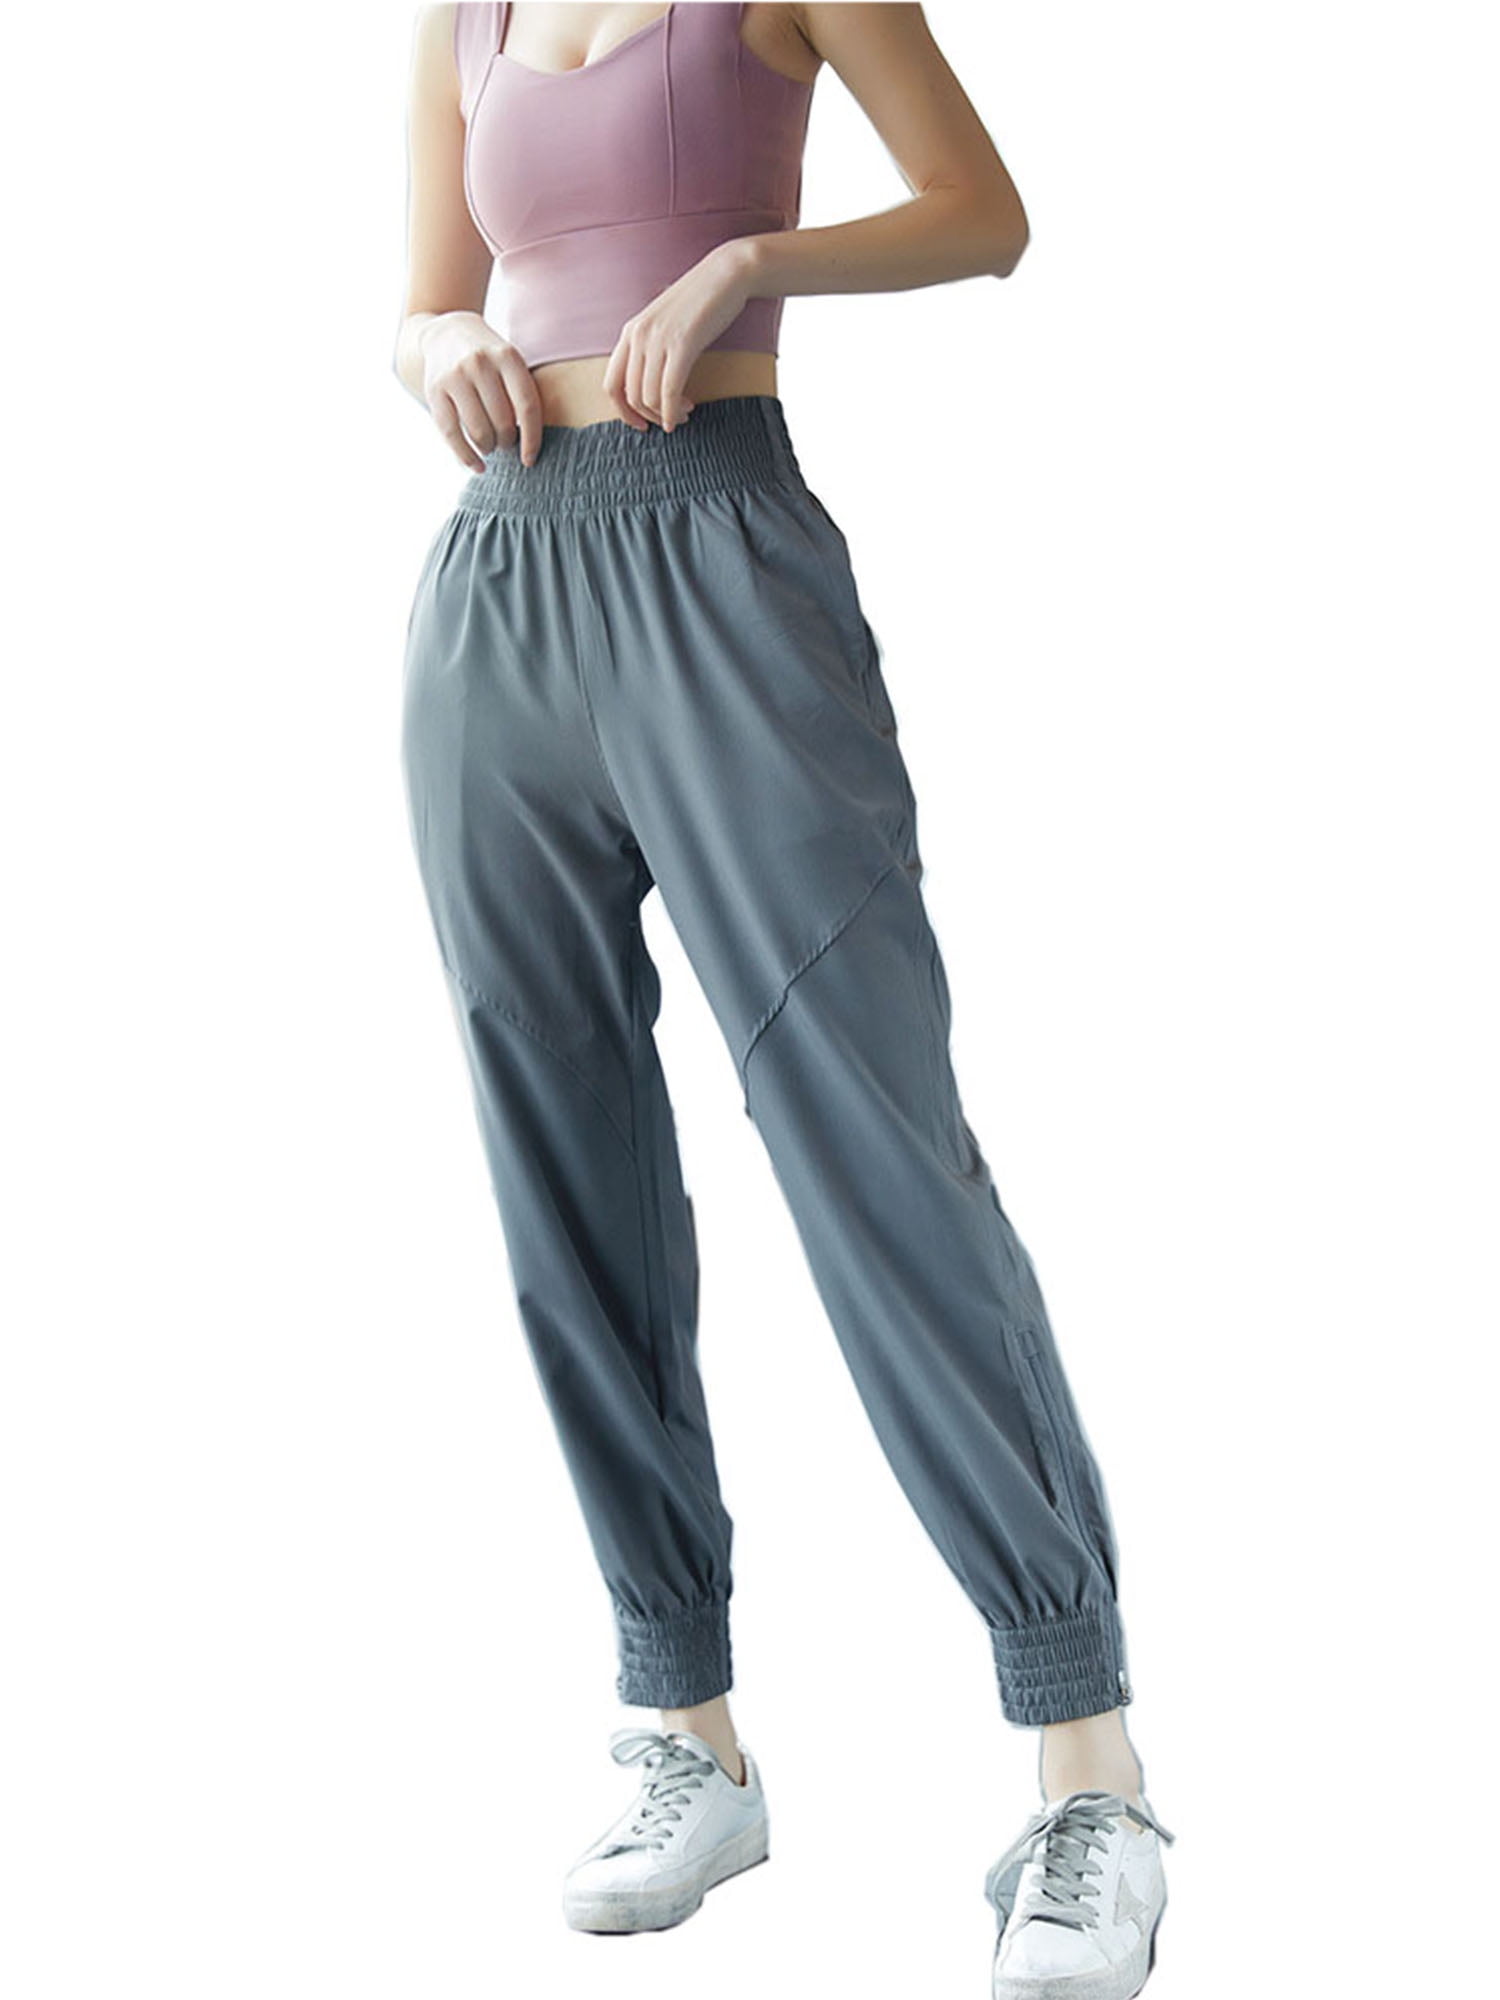 Maintain Vigour Women's High Waisted Jogging Sweatpants Lounge Pants Drawstring Fit Casual Yoga Baggy Pants with Pockets 